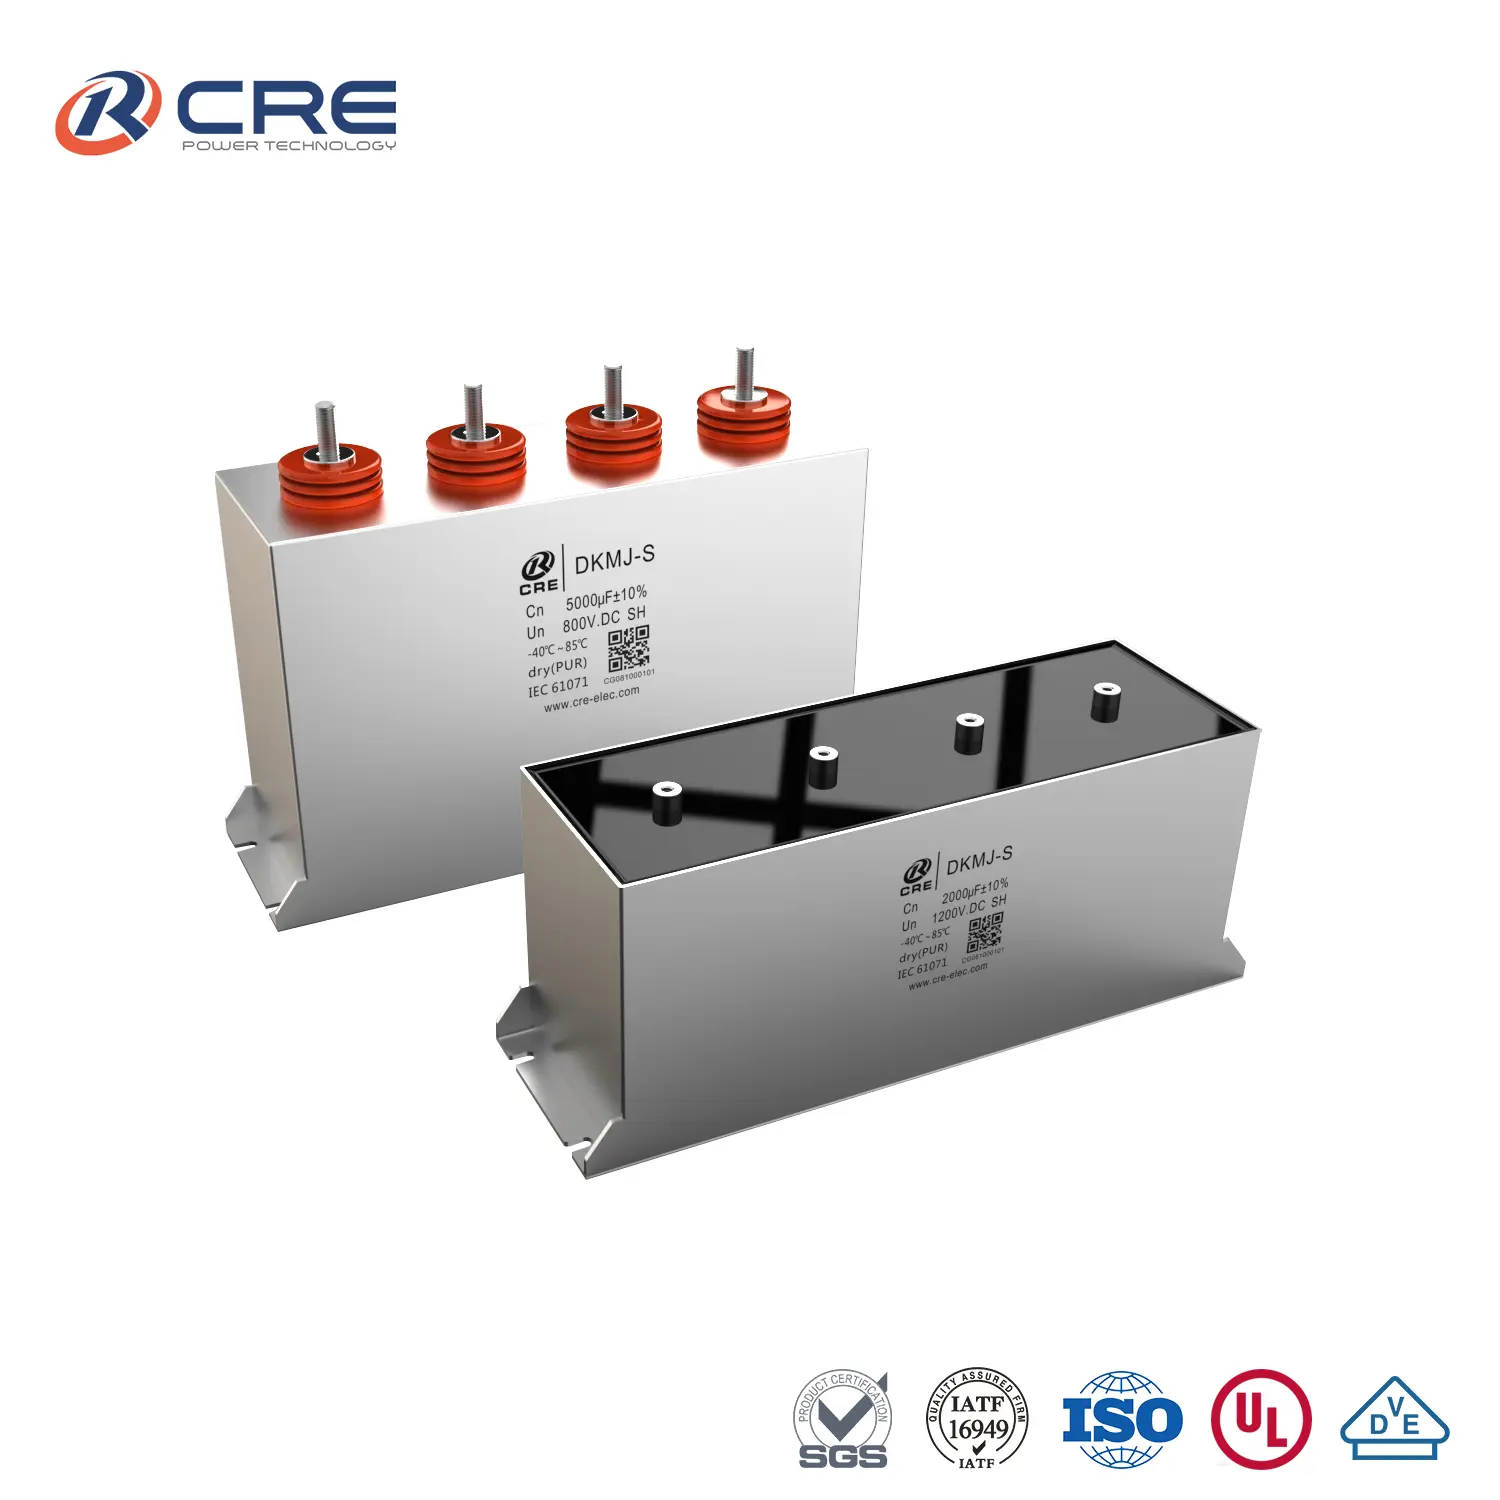 Customized DC Link Film Capacitors for Railway Traction Converter